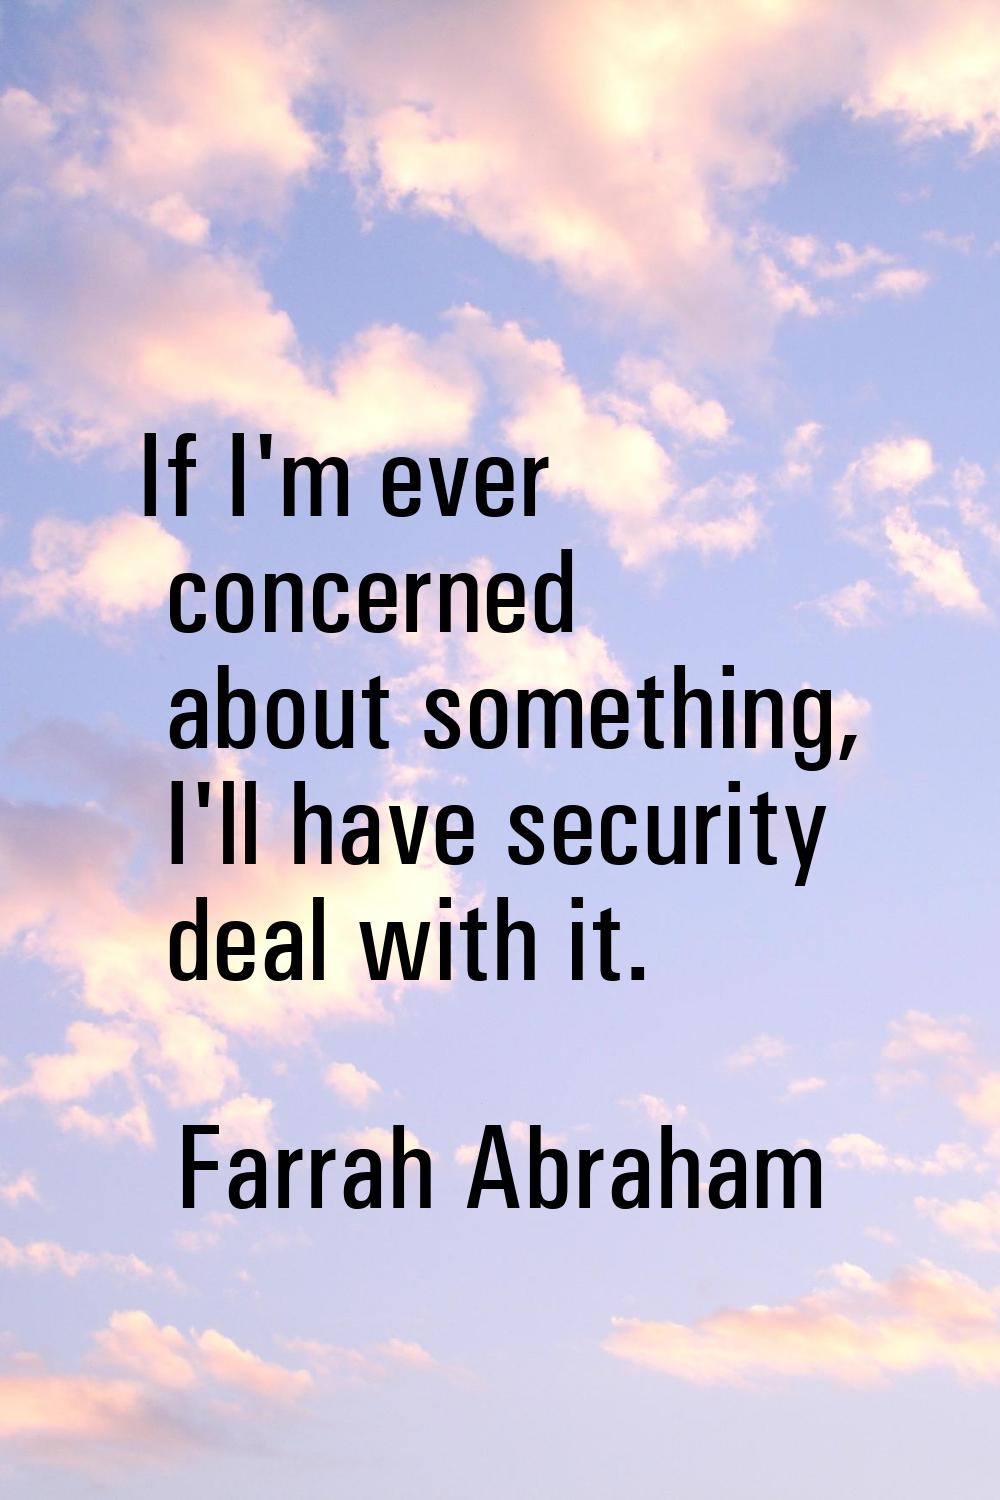 If I'm ever concerned about something, I'll have security deal with it.